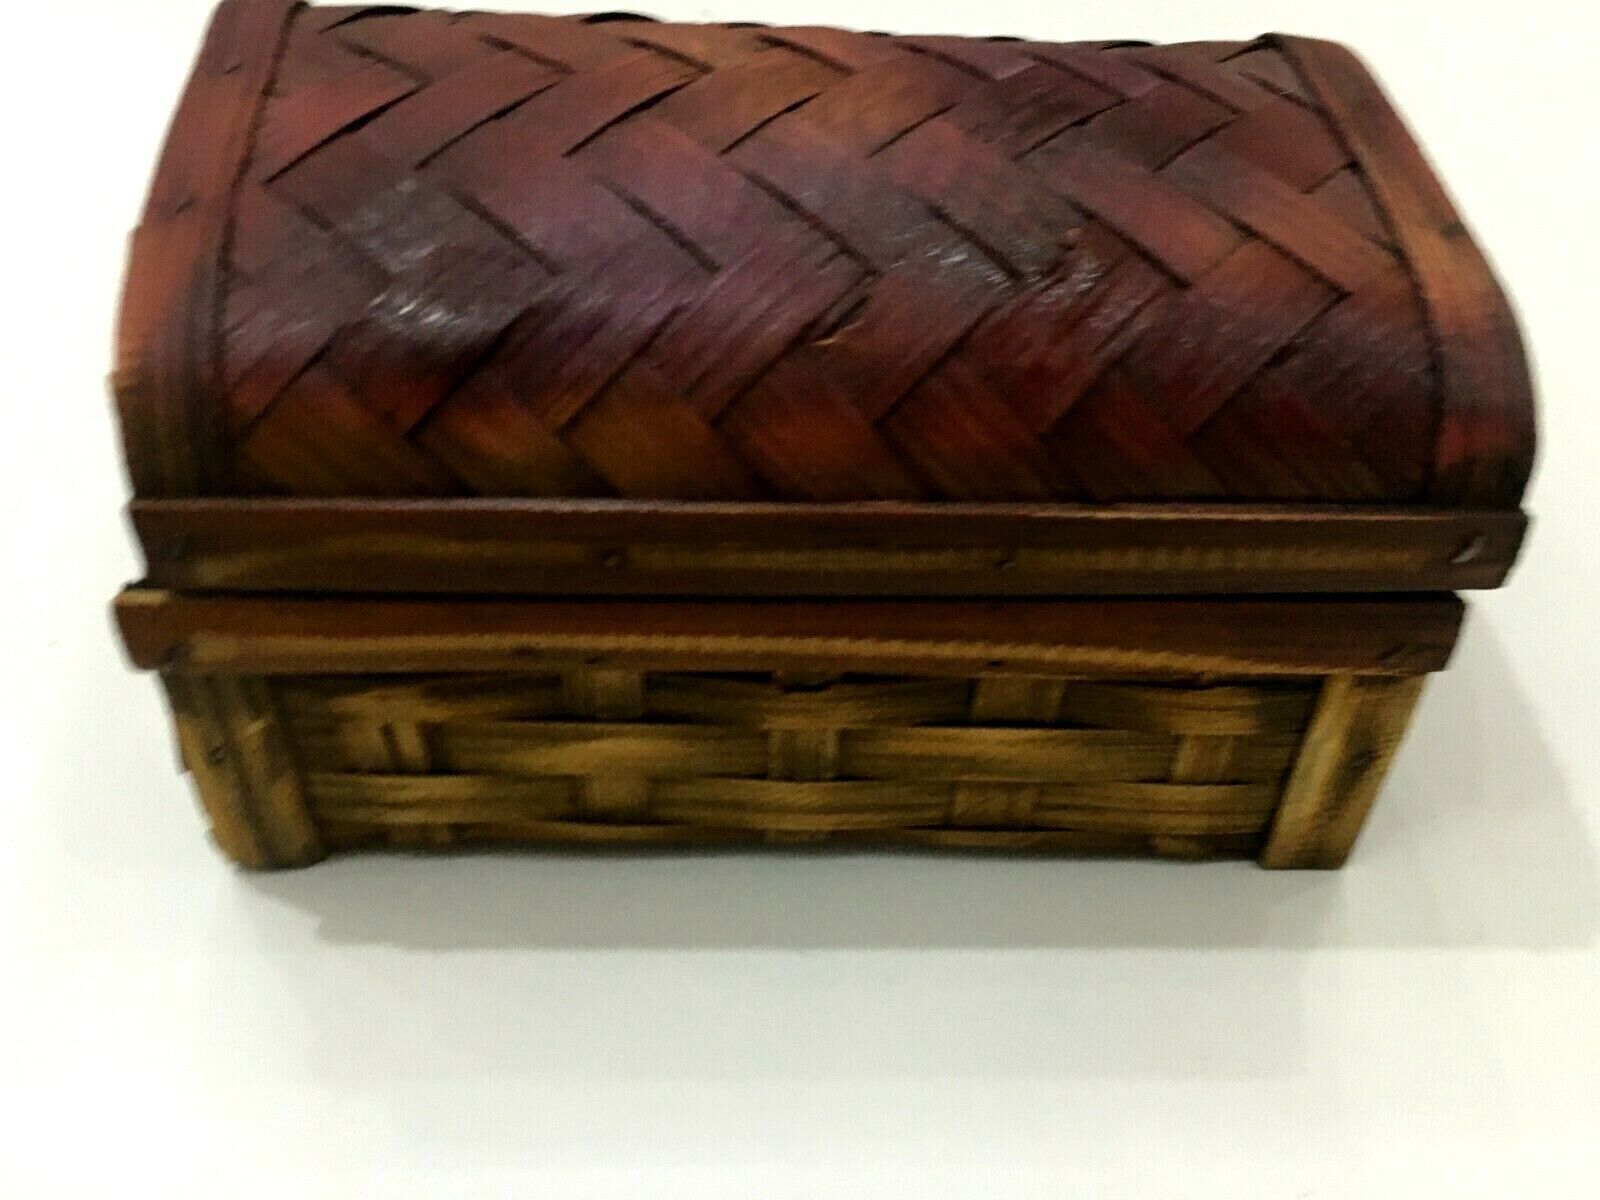 Old Box Wooden Jewelery Trunk (18x12x10)cm Hand Made Woven Brown Straw Decor